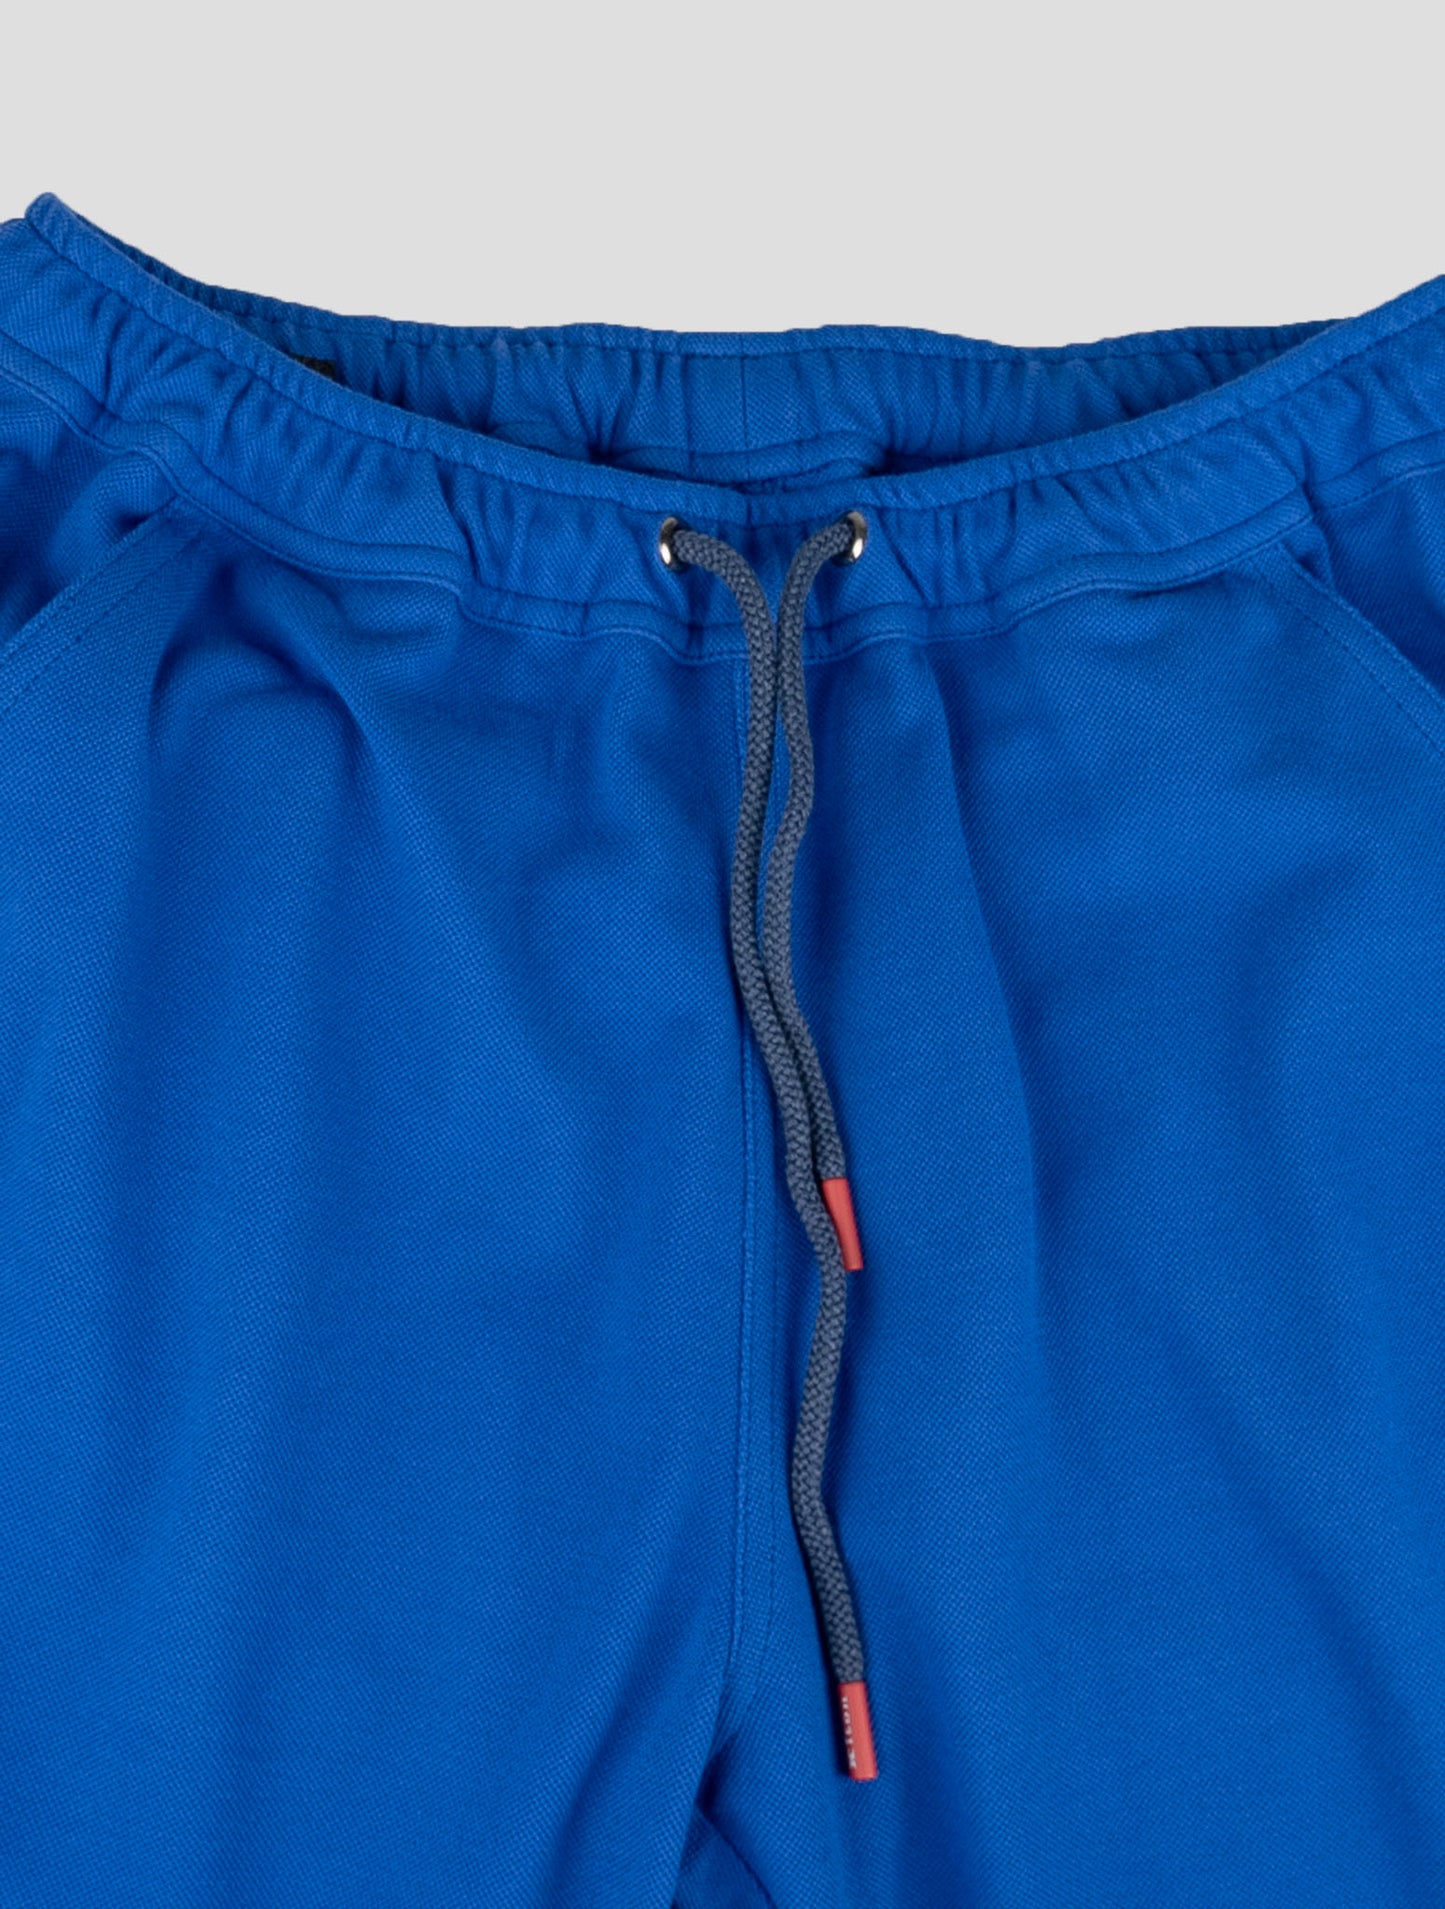 Kiton Matching Outfit - Black Umbi and Blue Short Pants Tracksuit